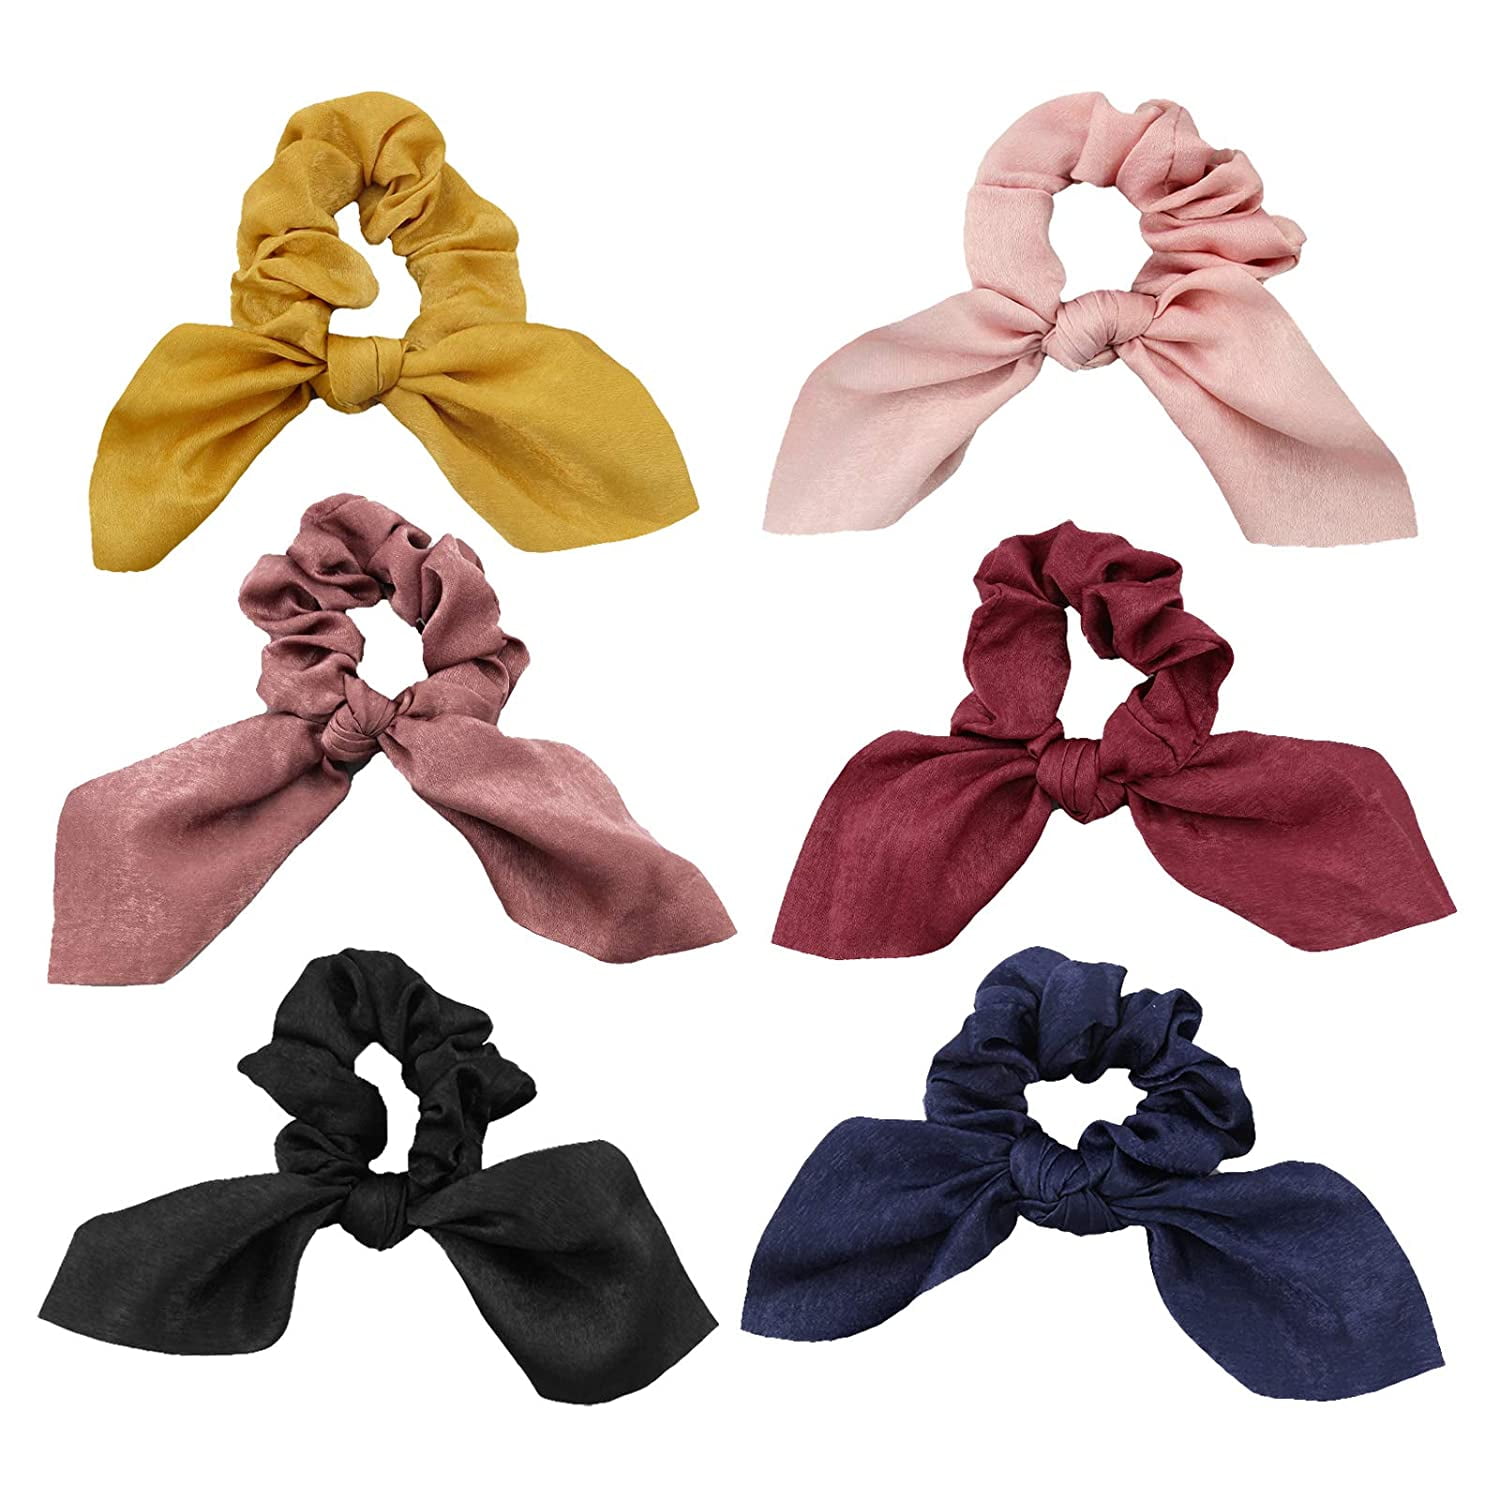 5x HAIR TIES Kids Girls Pony Tail Bobbles Scrunchie Bow Rubber Band Stars 